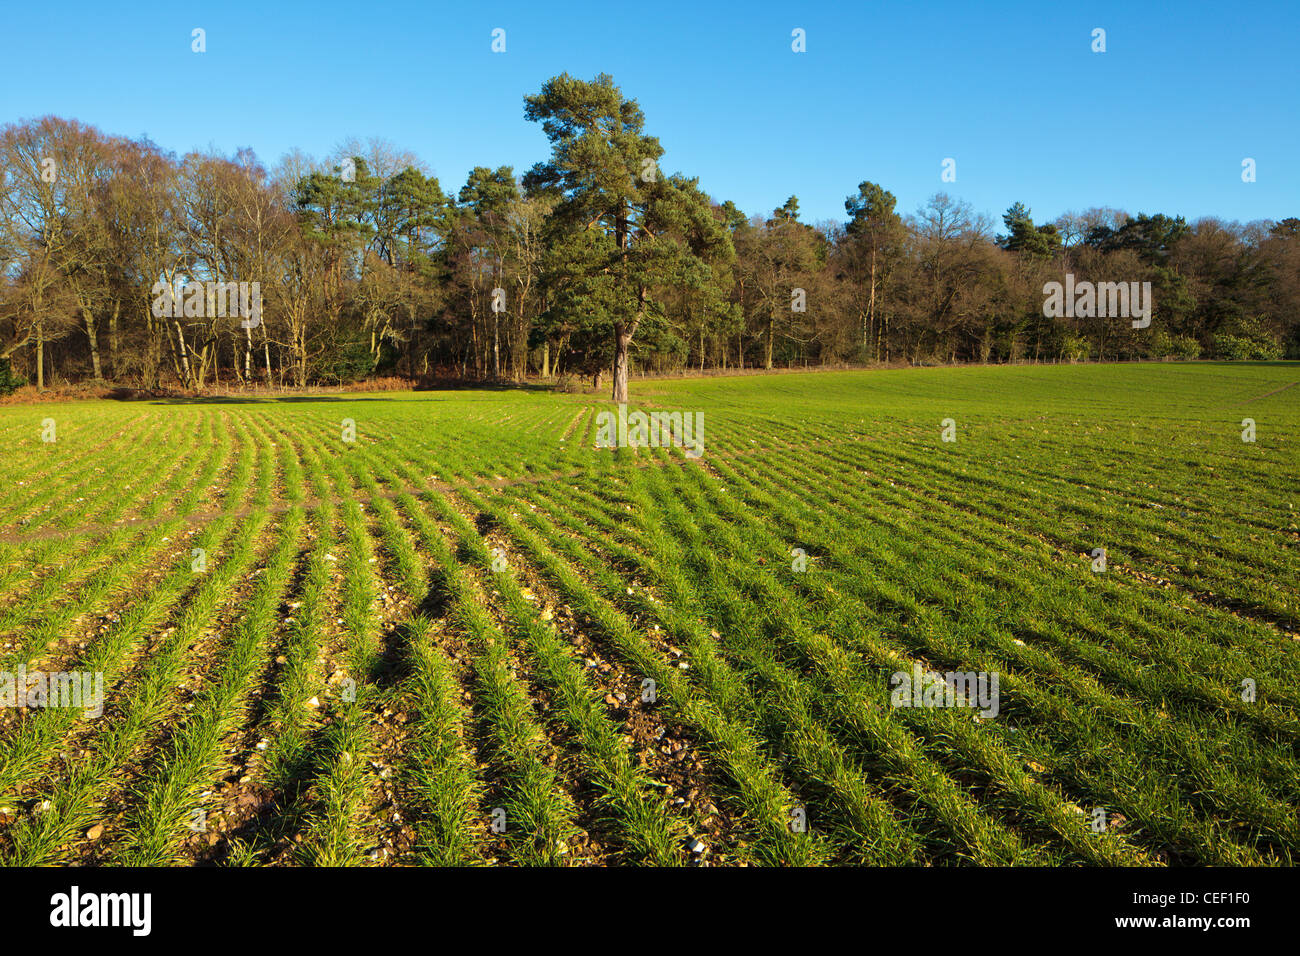 Crop drill pattern in a Chilterns field Oxfordshire England UK Stock Photo